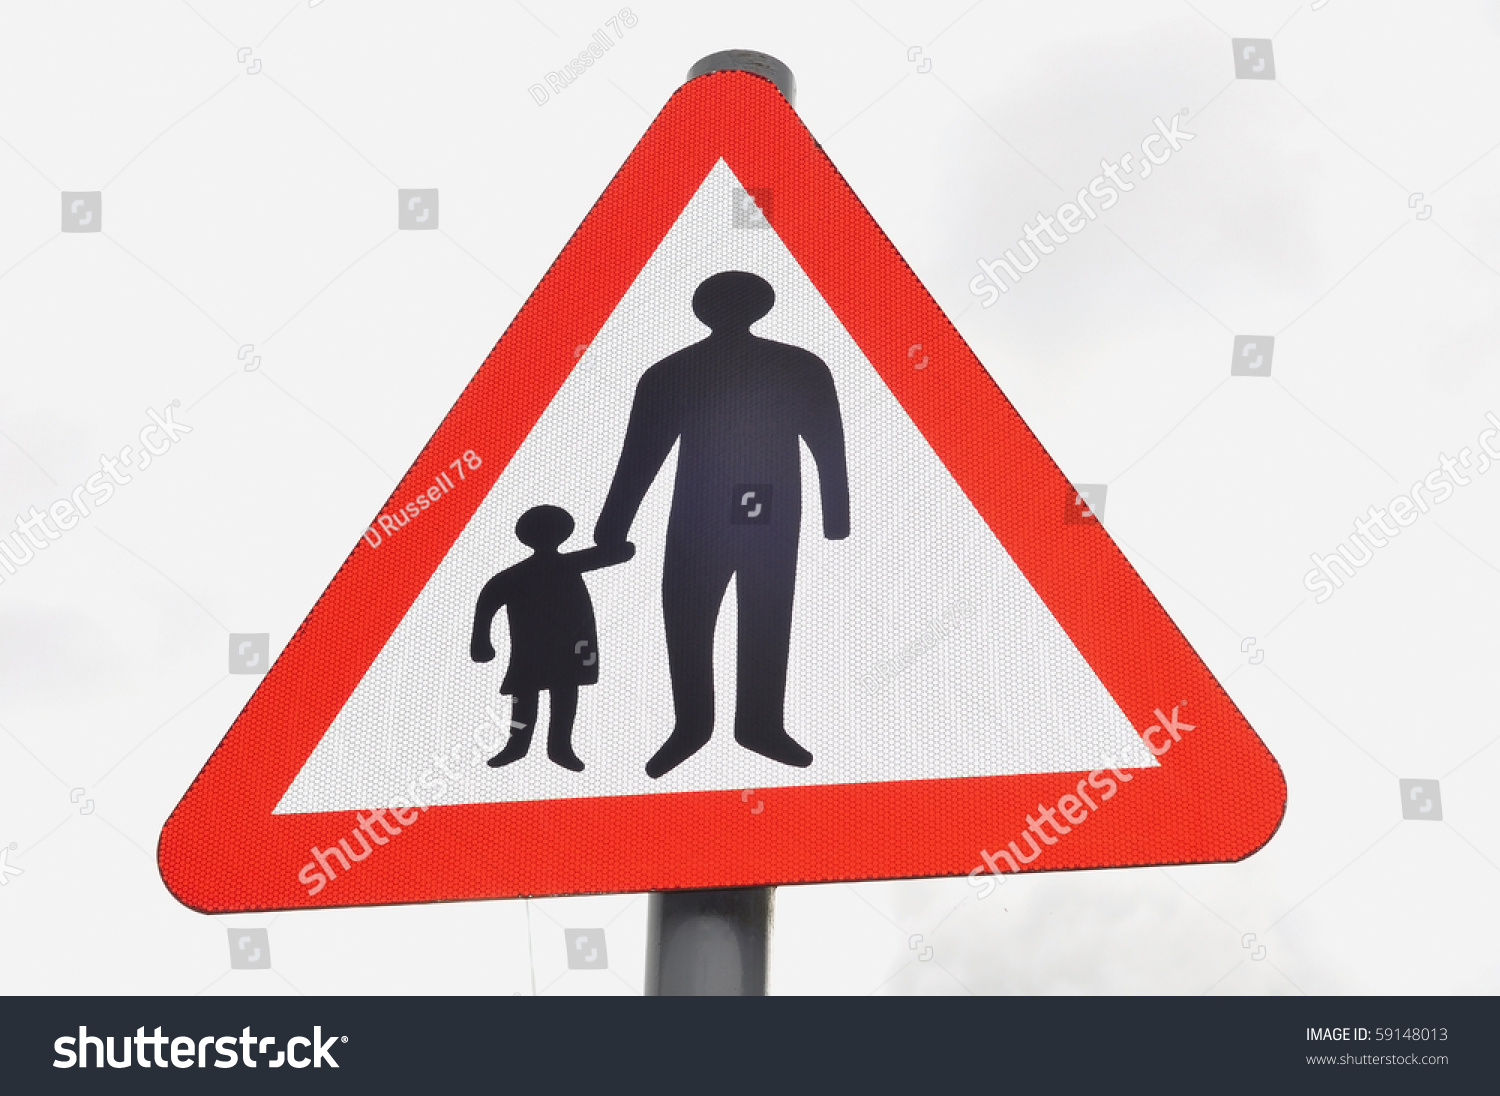 Parent And Child Road Sign Stock Photo 59148013 : Shutterstock